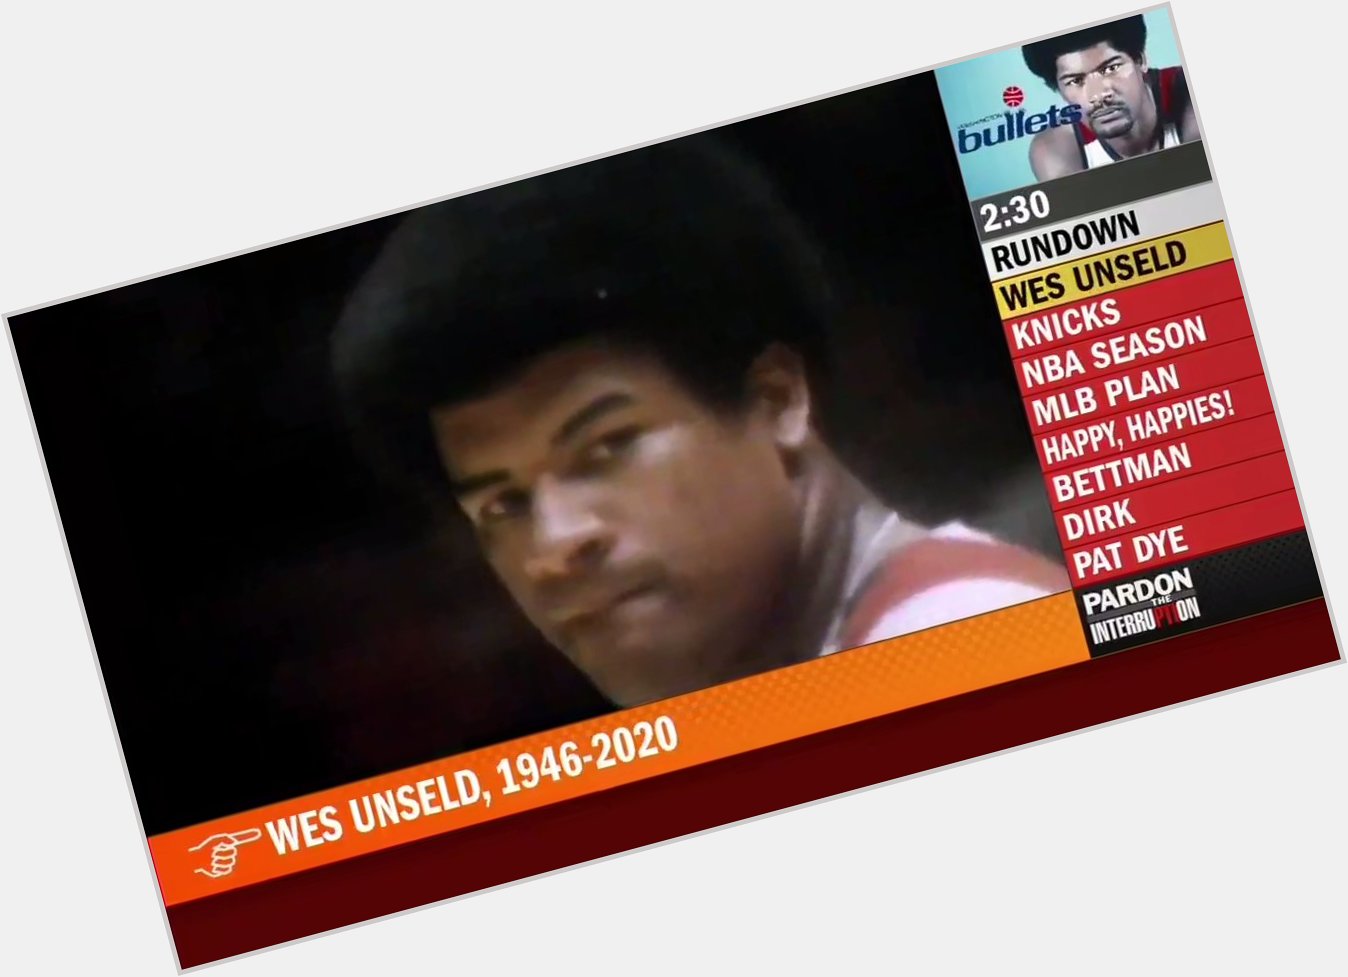 Happy birthday in heaven Wes Unseld.  